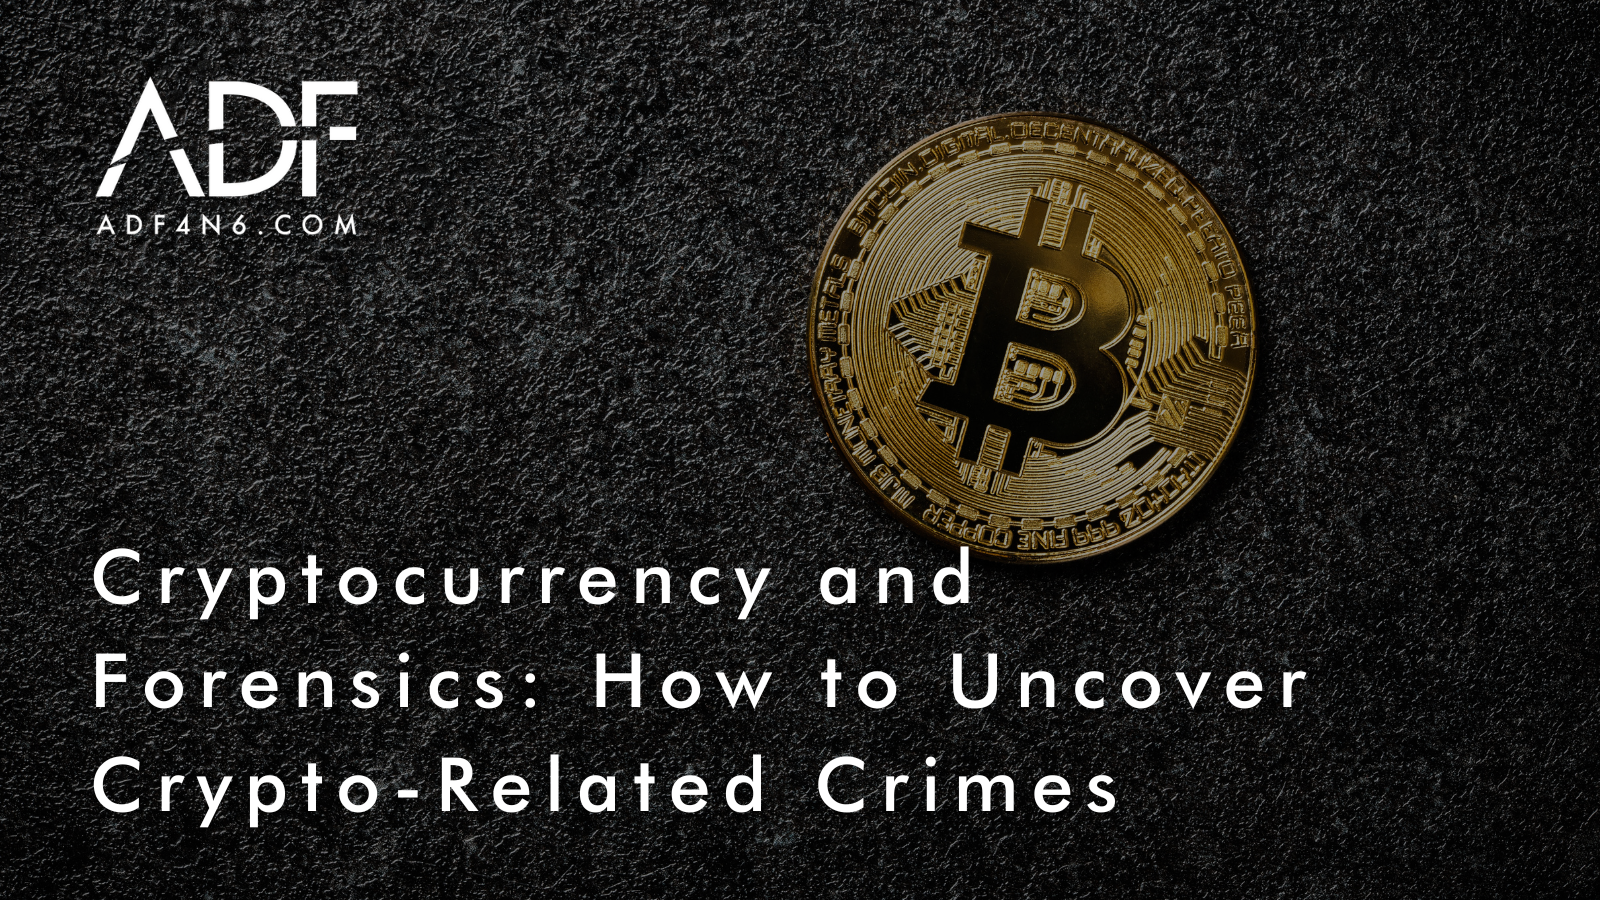 Cryptocurrency and Forensics: How to Uncover Crypto-Related Crimes